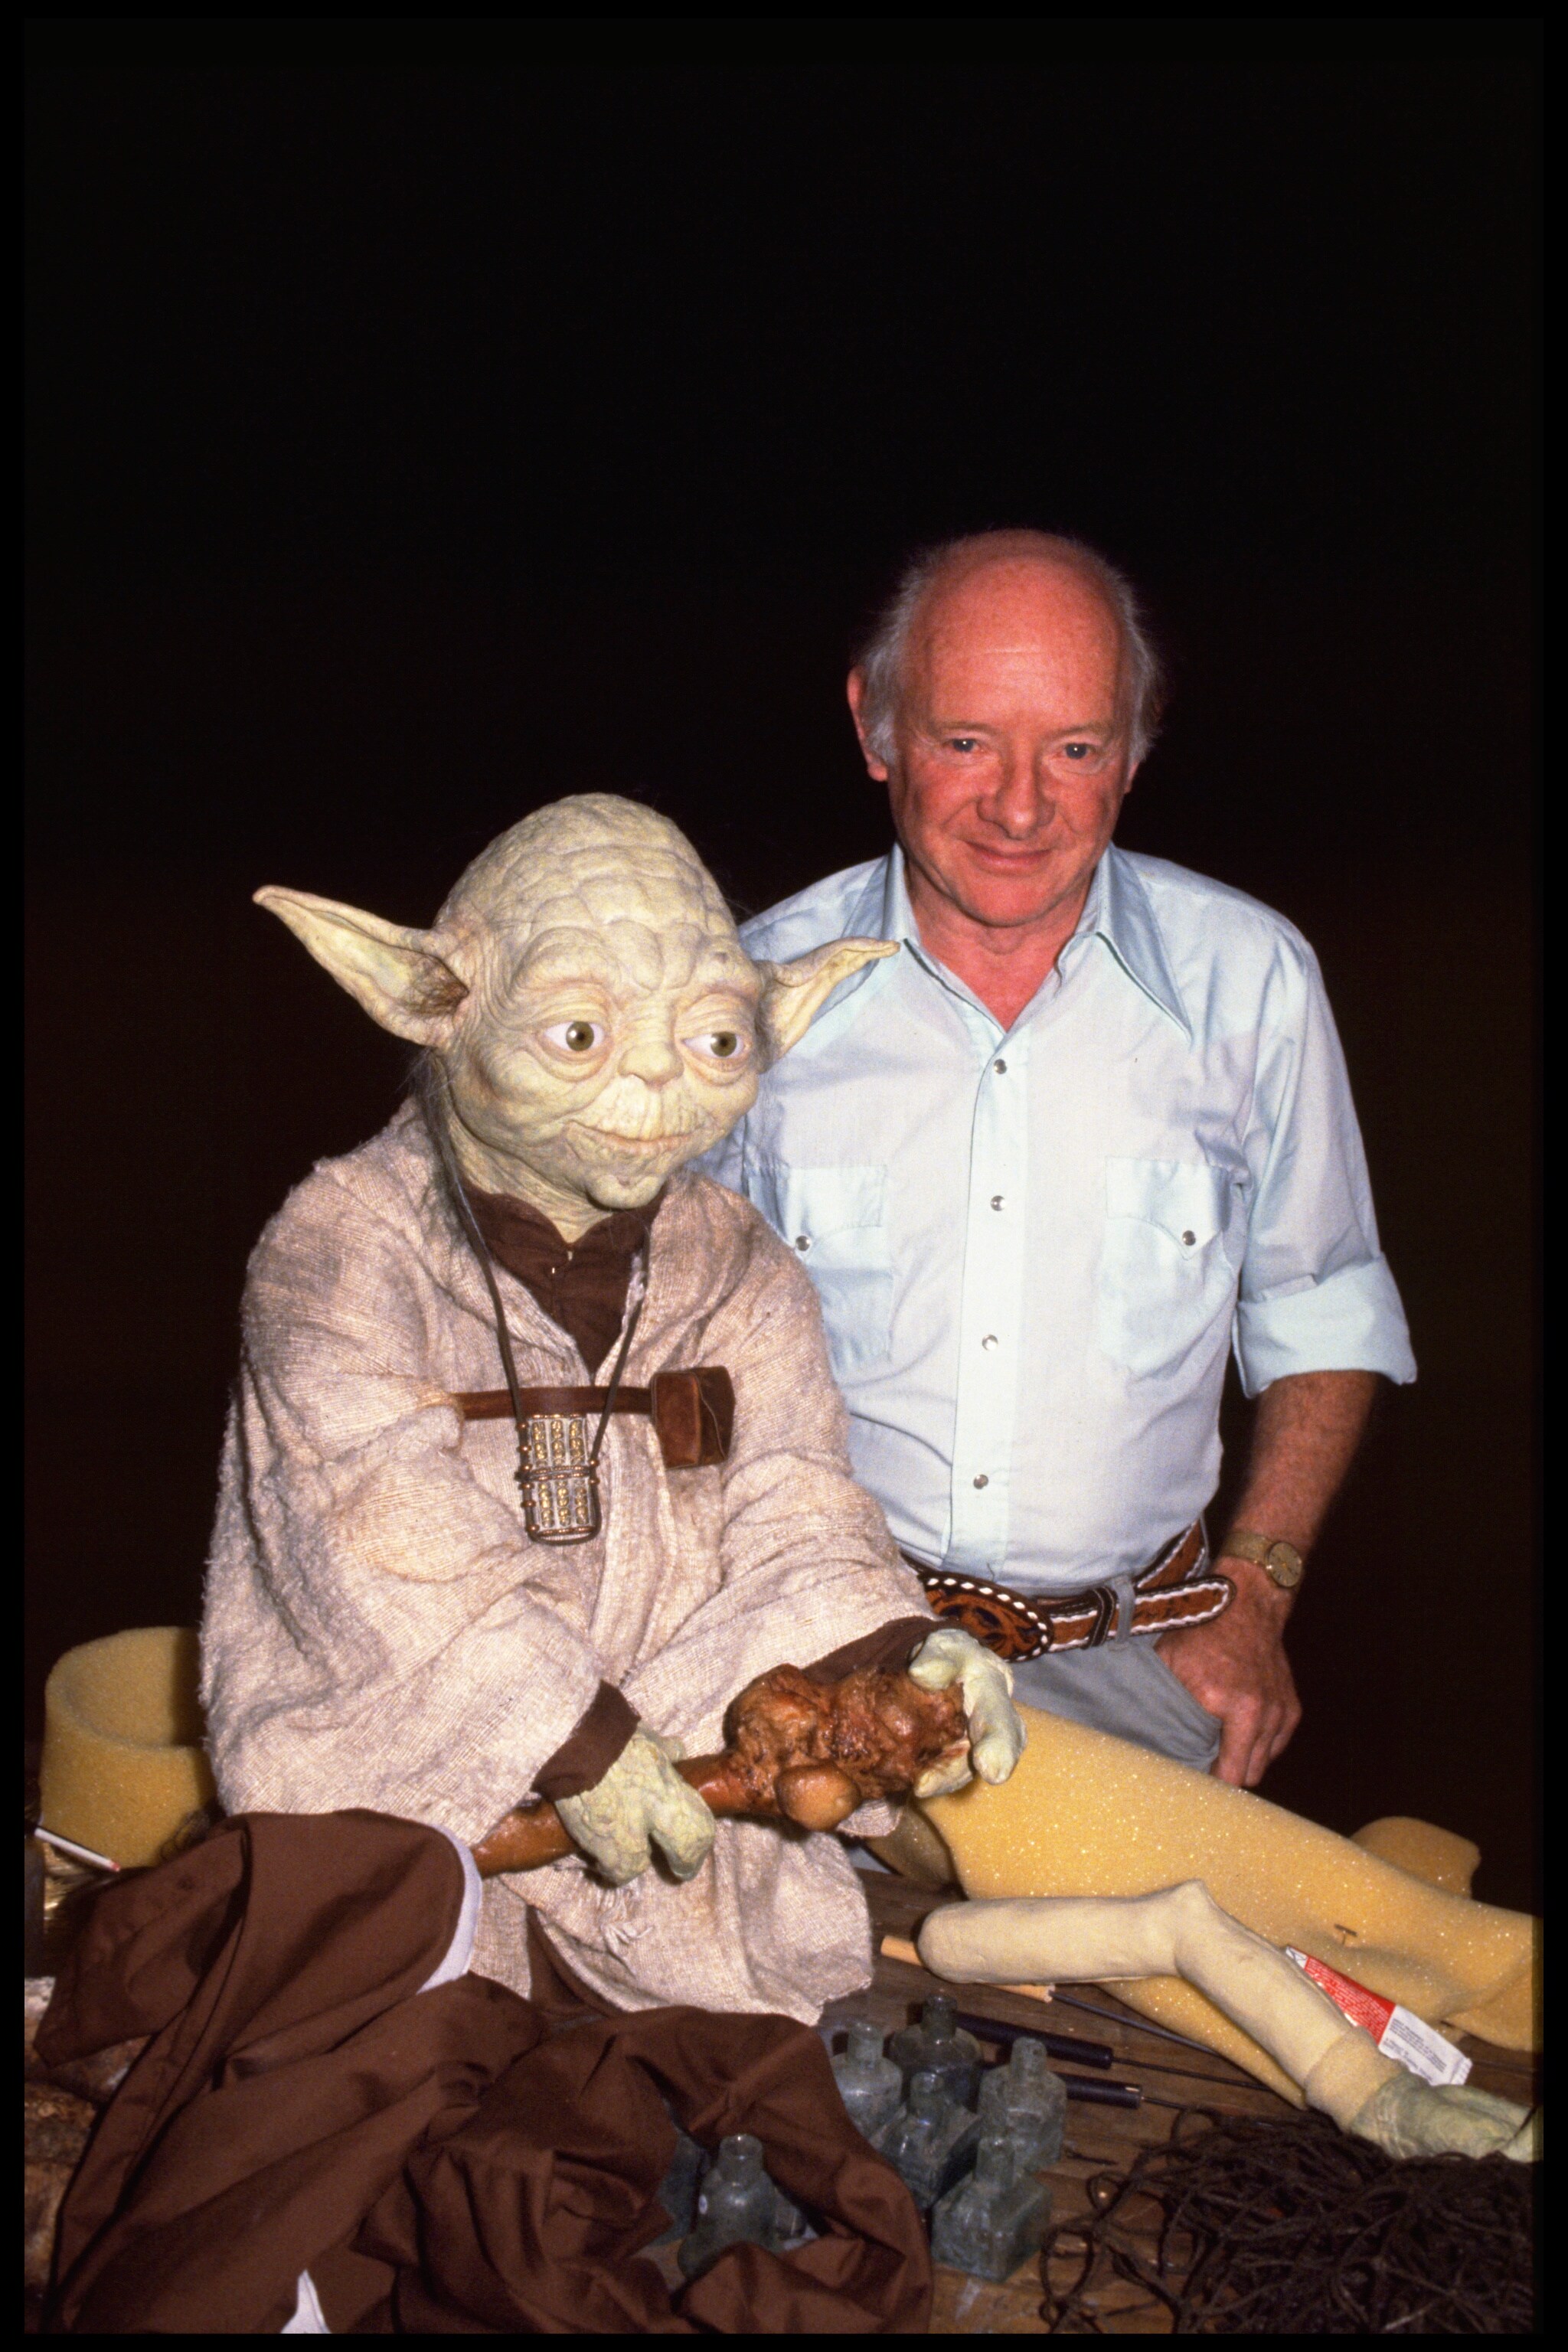 Makeup artist and designer Stuart Freeborn with the Yoda puppet. Freeborn based Yoda's face on on...